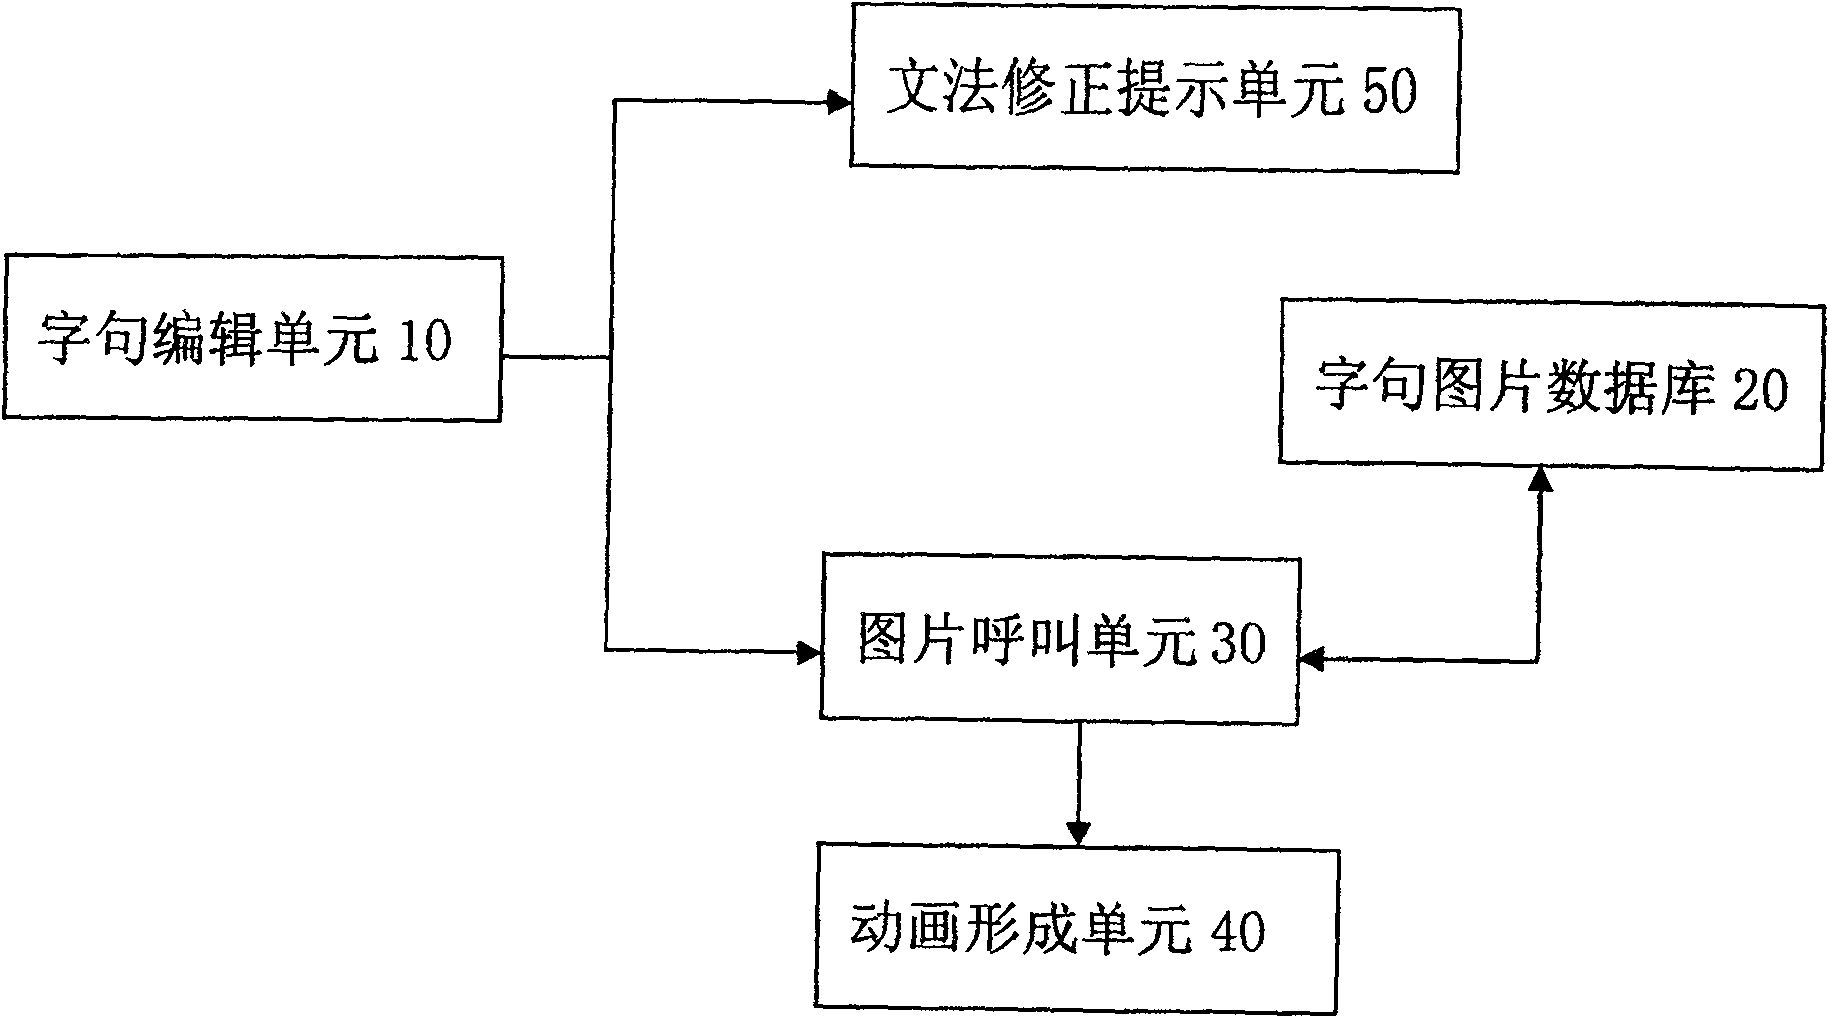 Cartoon type language learning system and its cartoon producing method